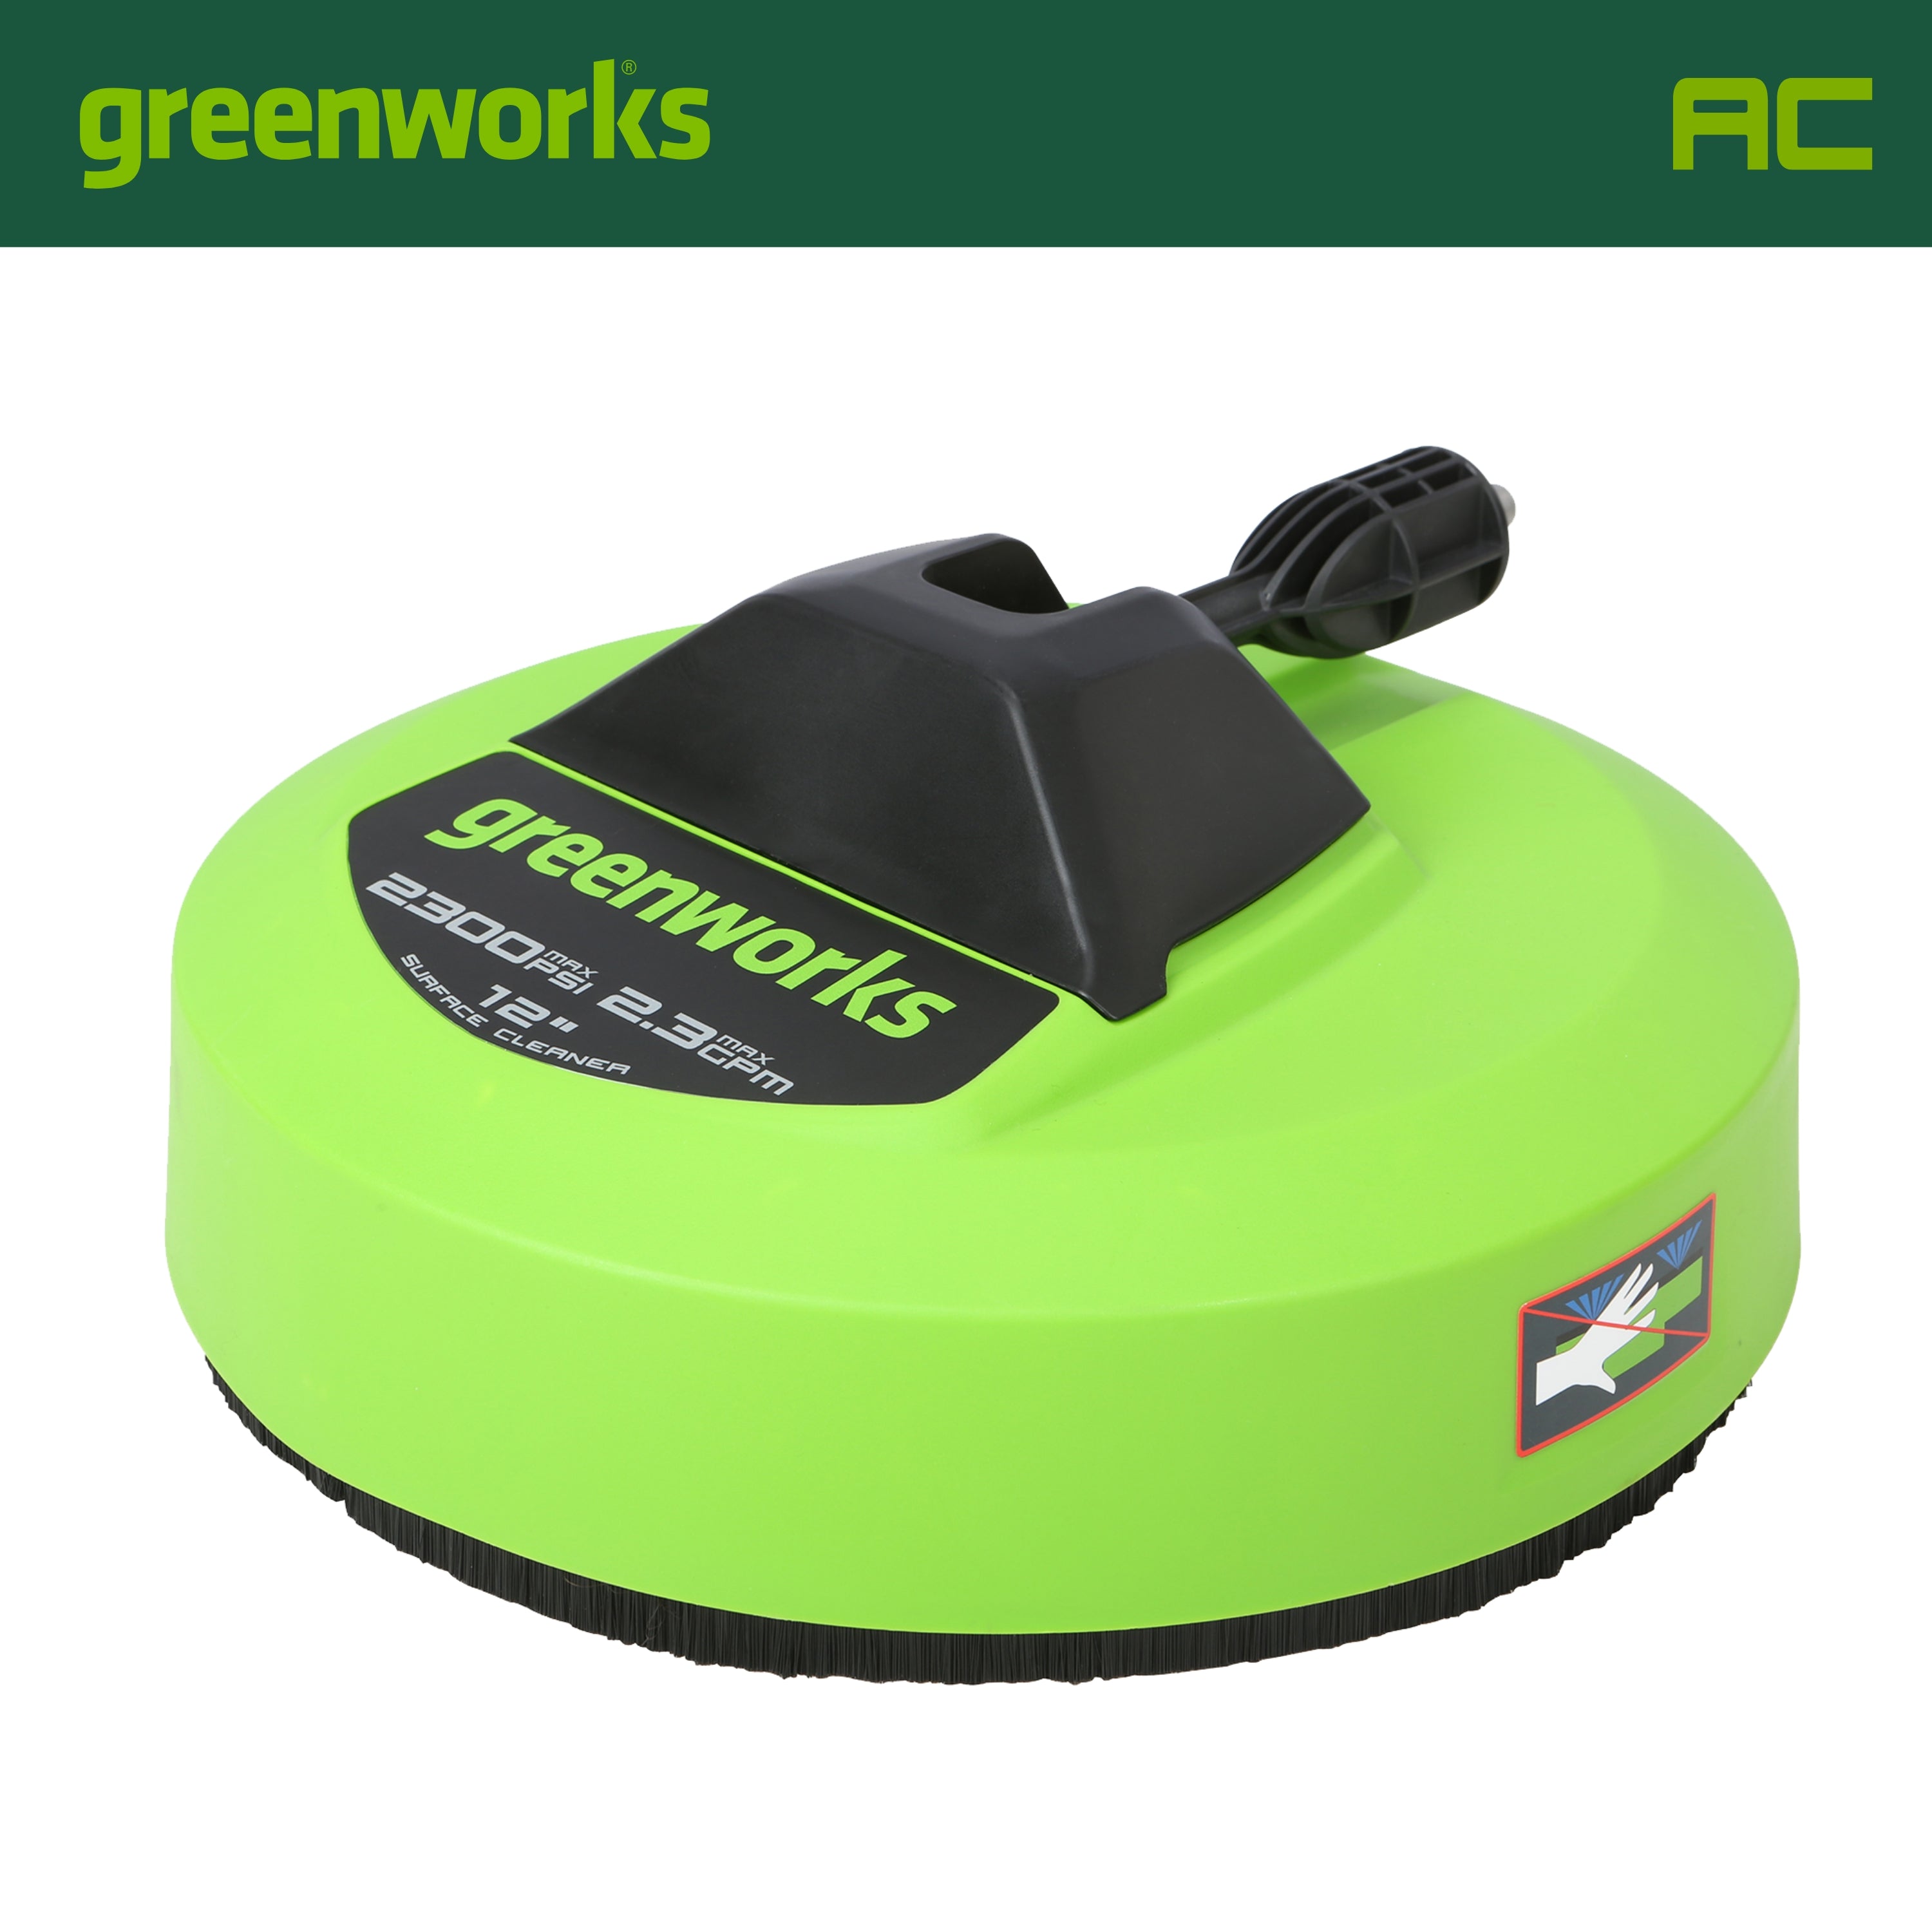 aniversario Ánimo hormigón 12-Inch Rotating Surface Cleaner | Greenworks Tools